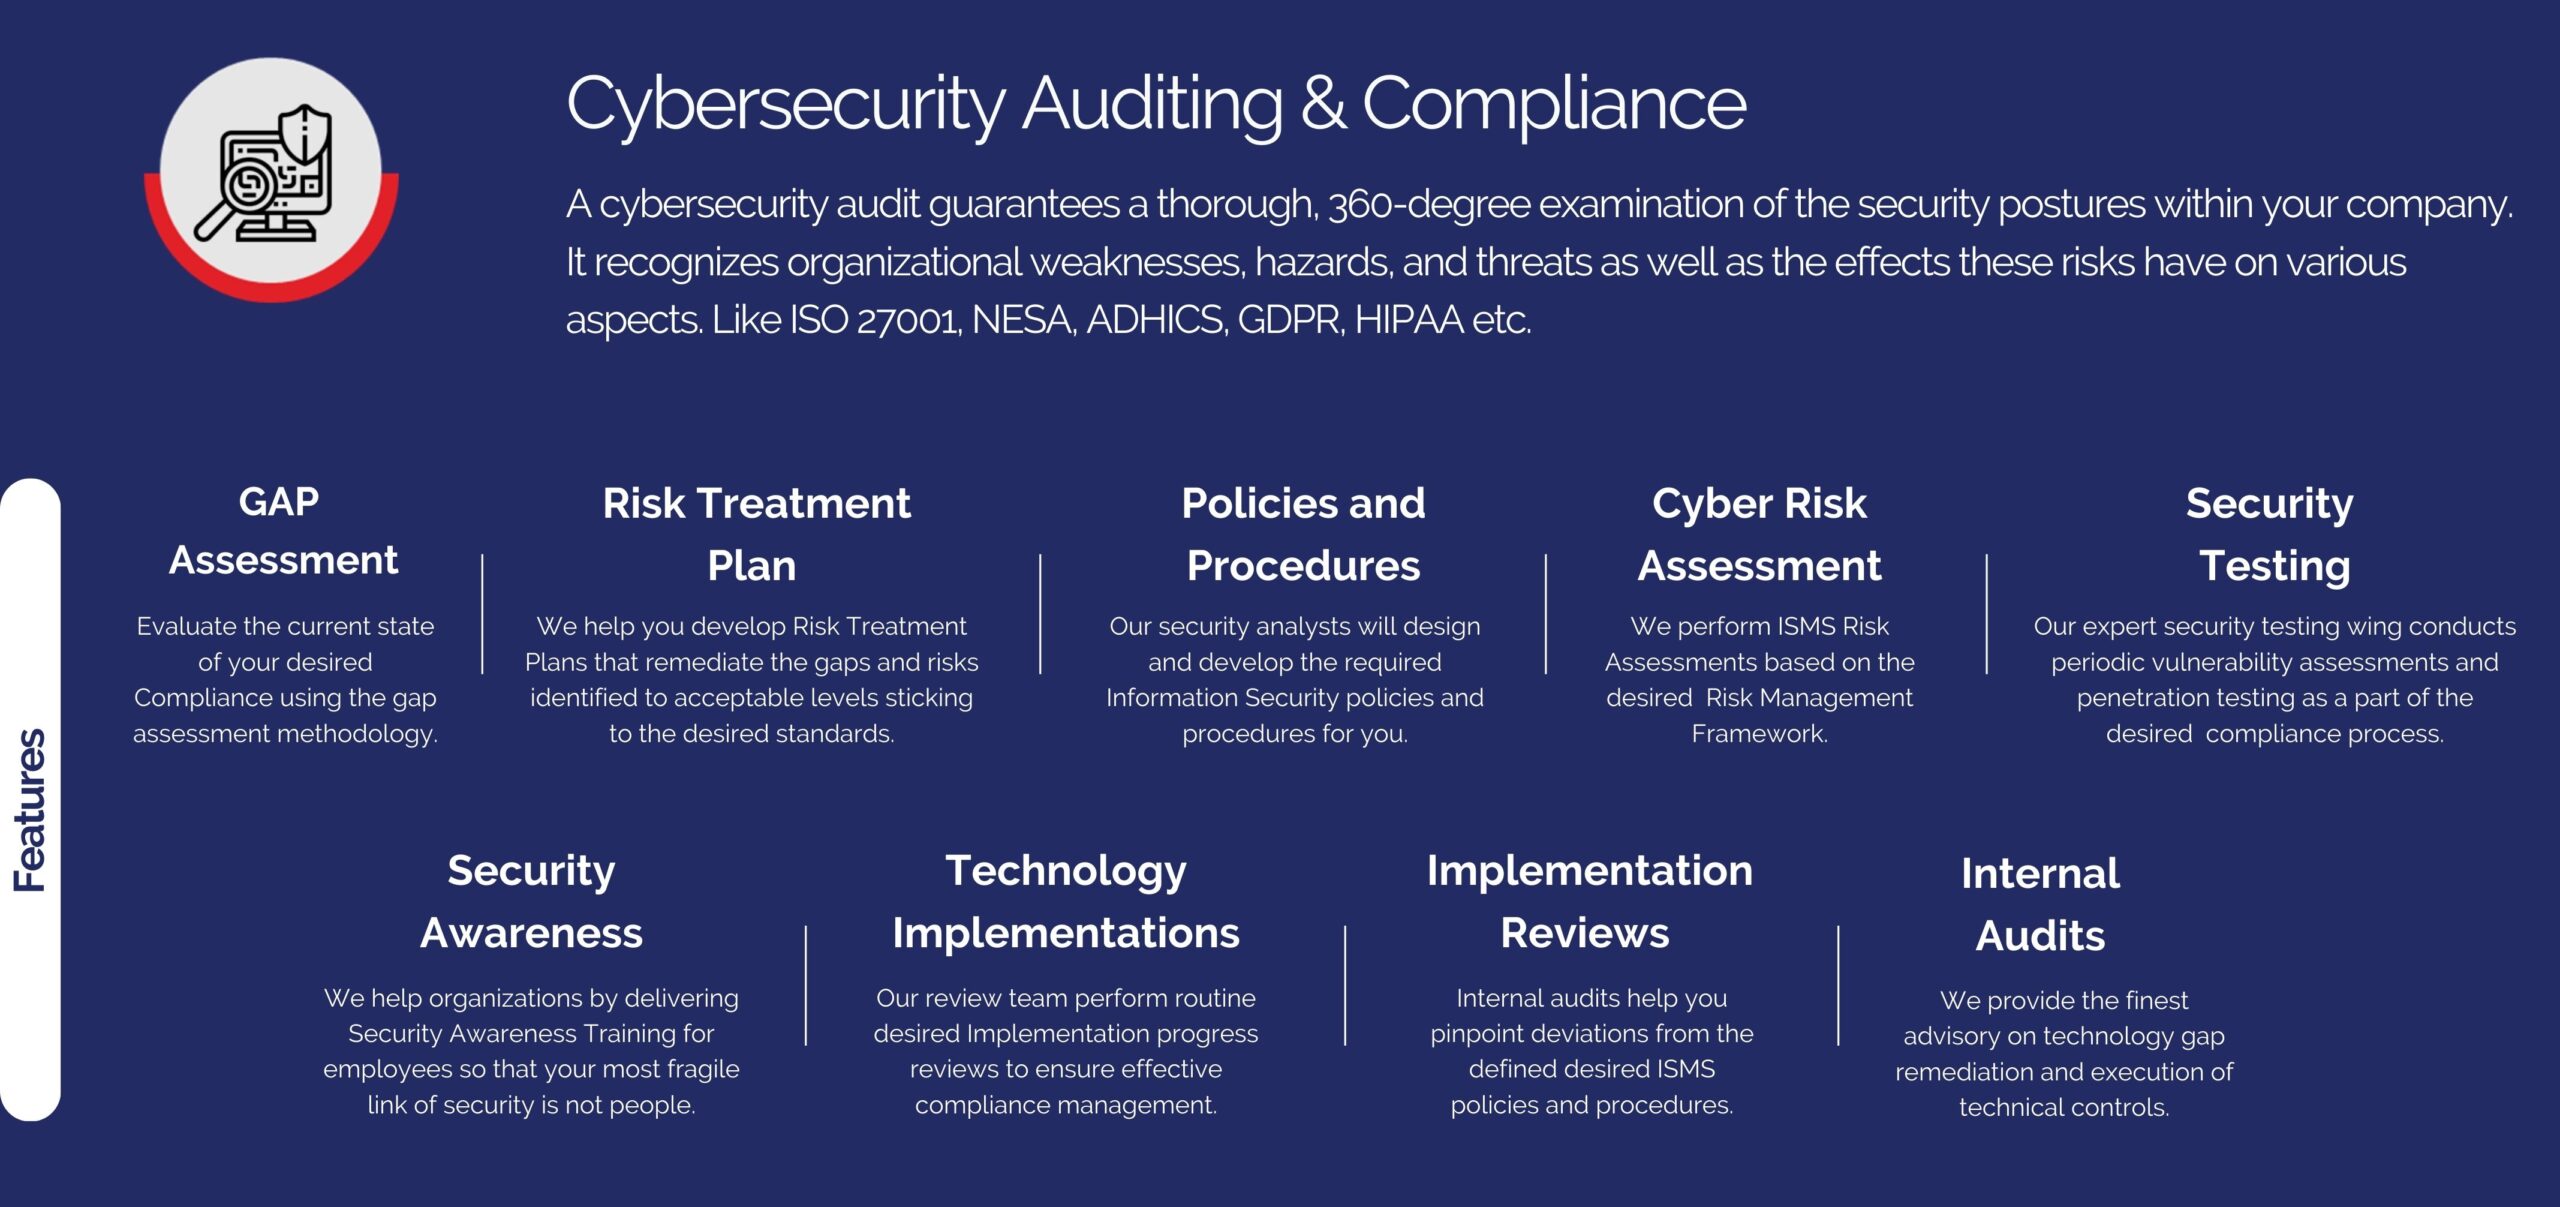 Cyber Security Auditing & Compliance Services by GBS